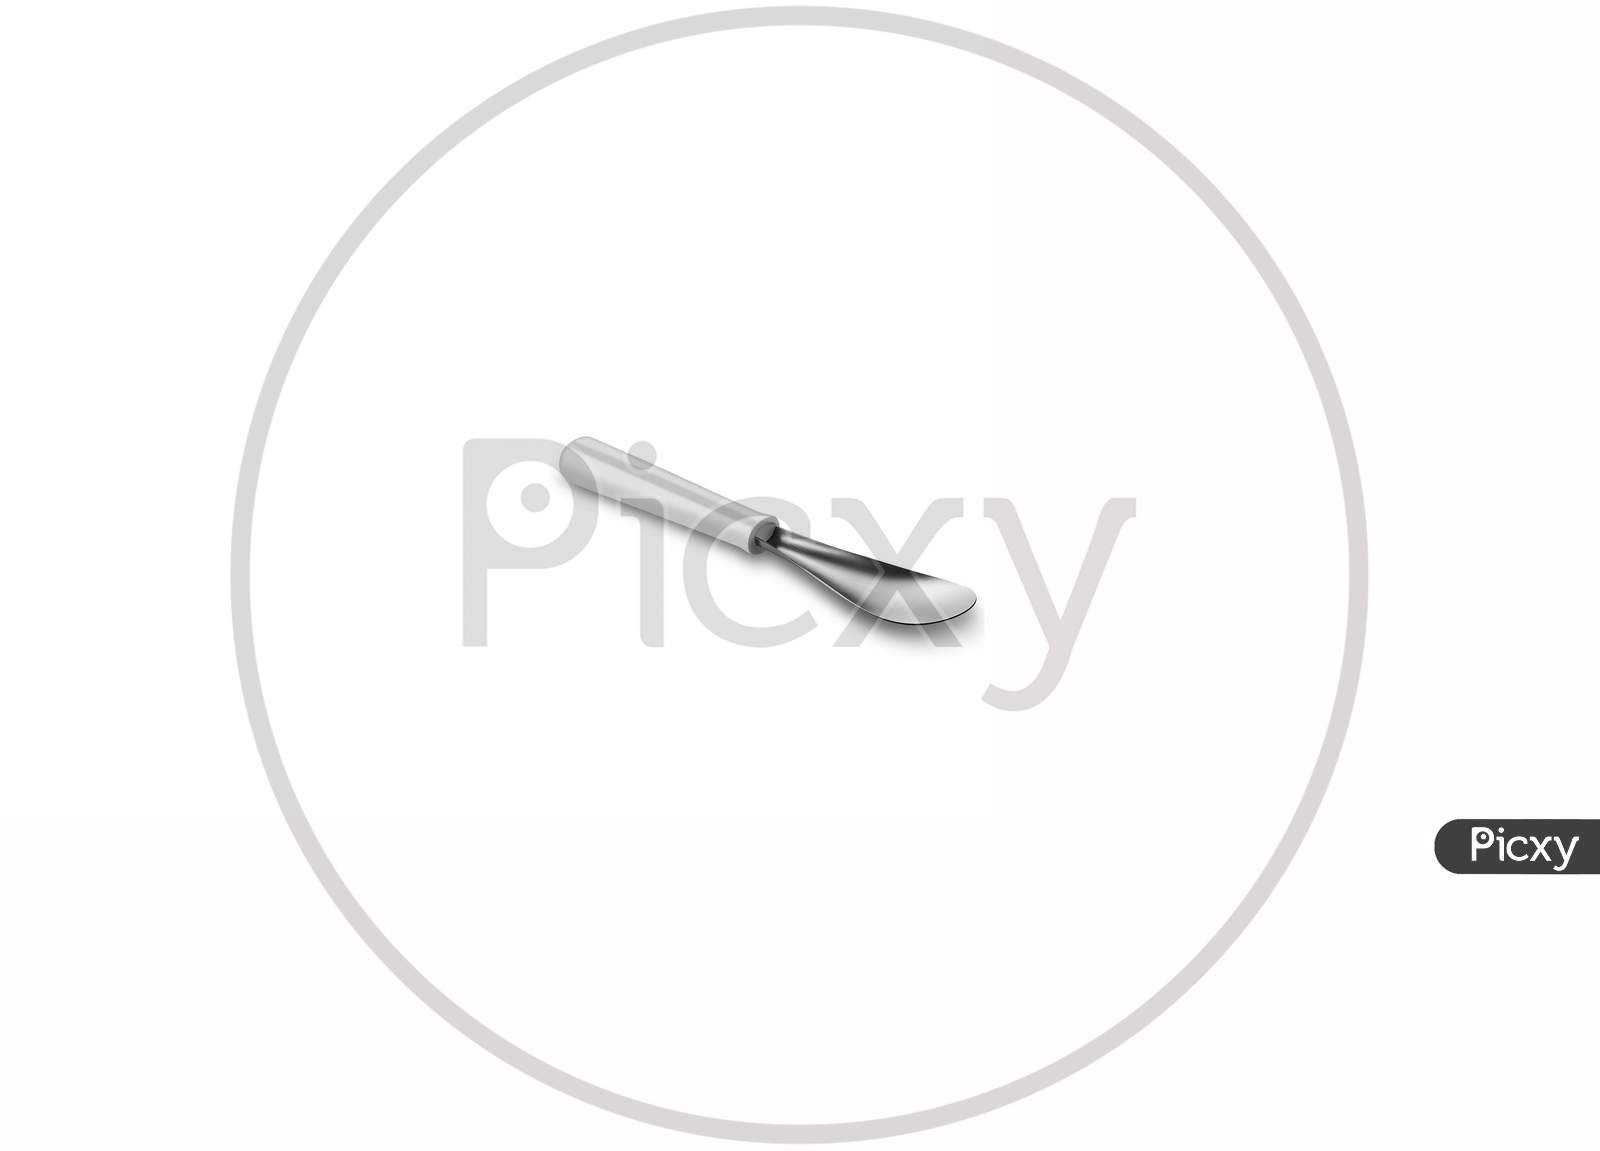 Diagonally Kept One Silver Metal Cooking Spatula Isolated On A White Background